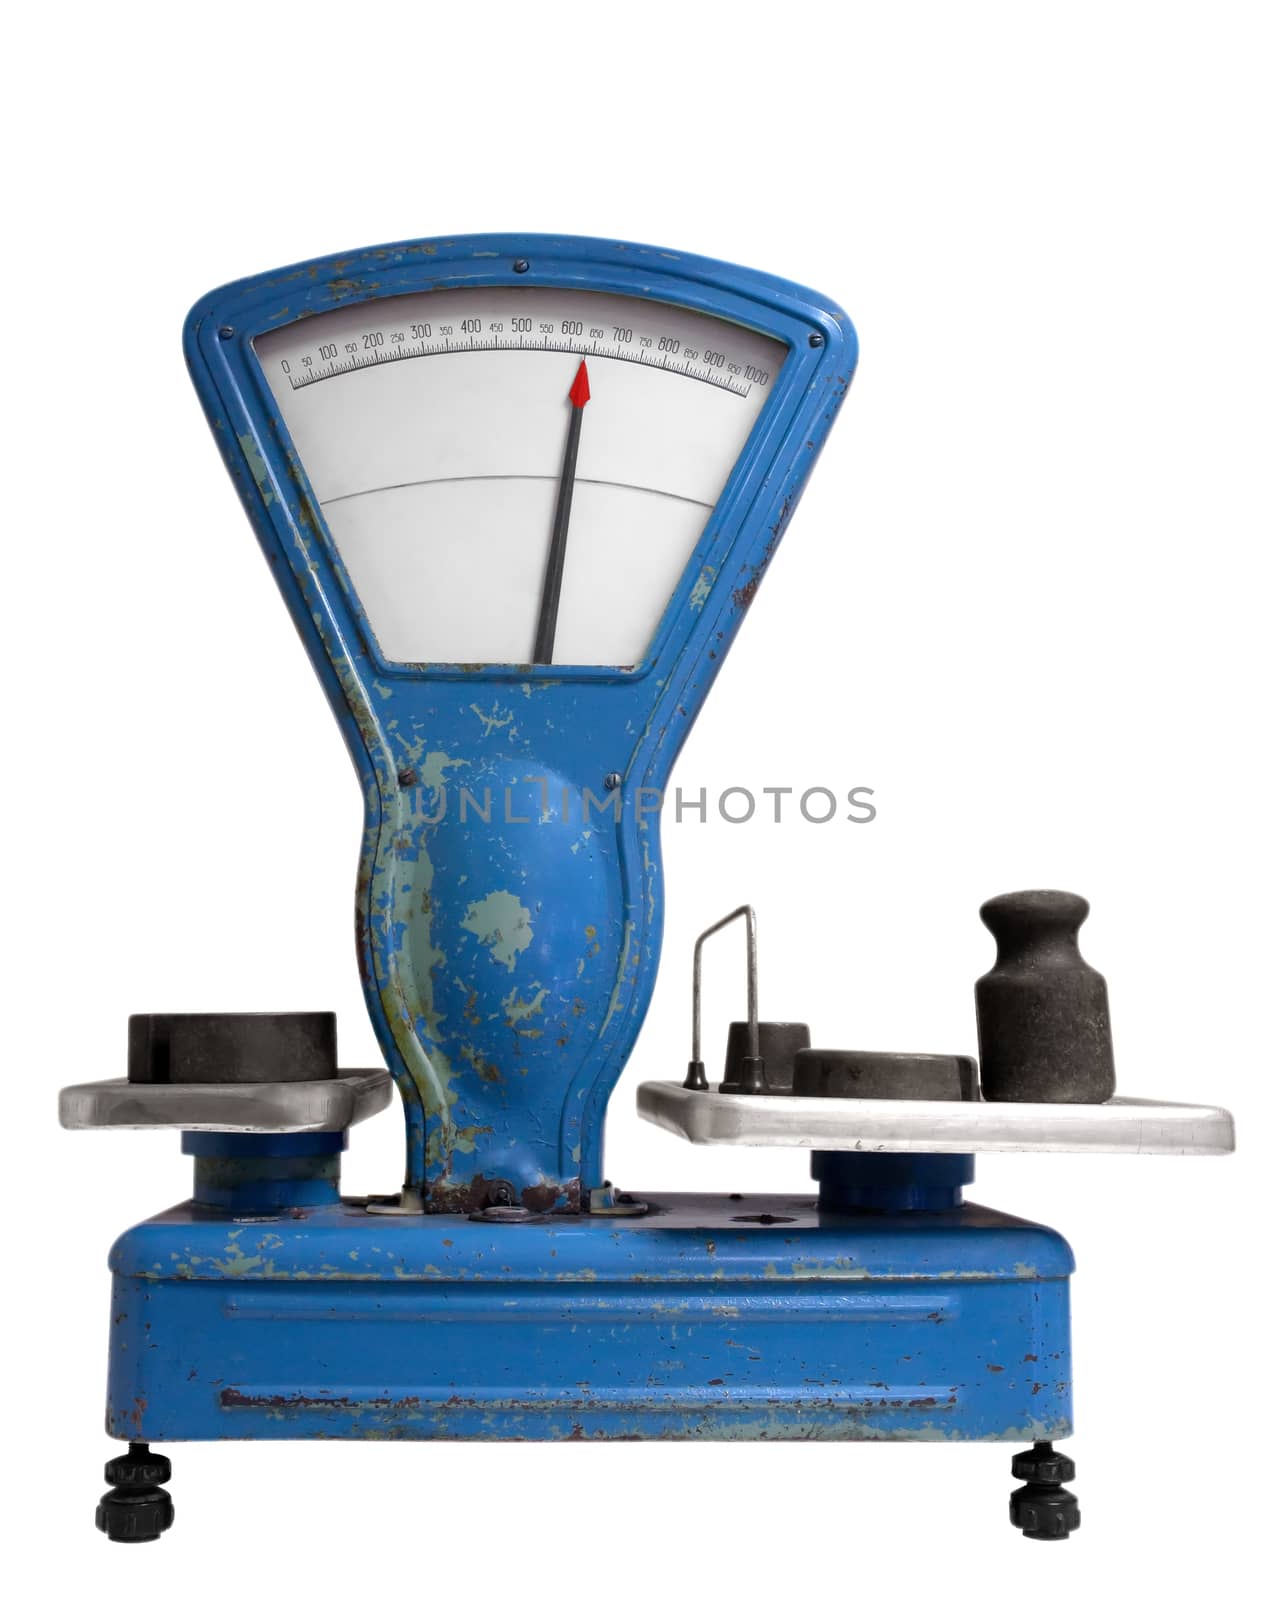 Vintage old weight scale. Clipping path included.